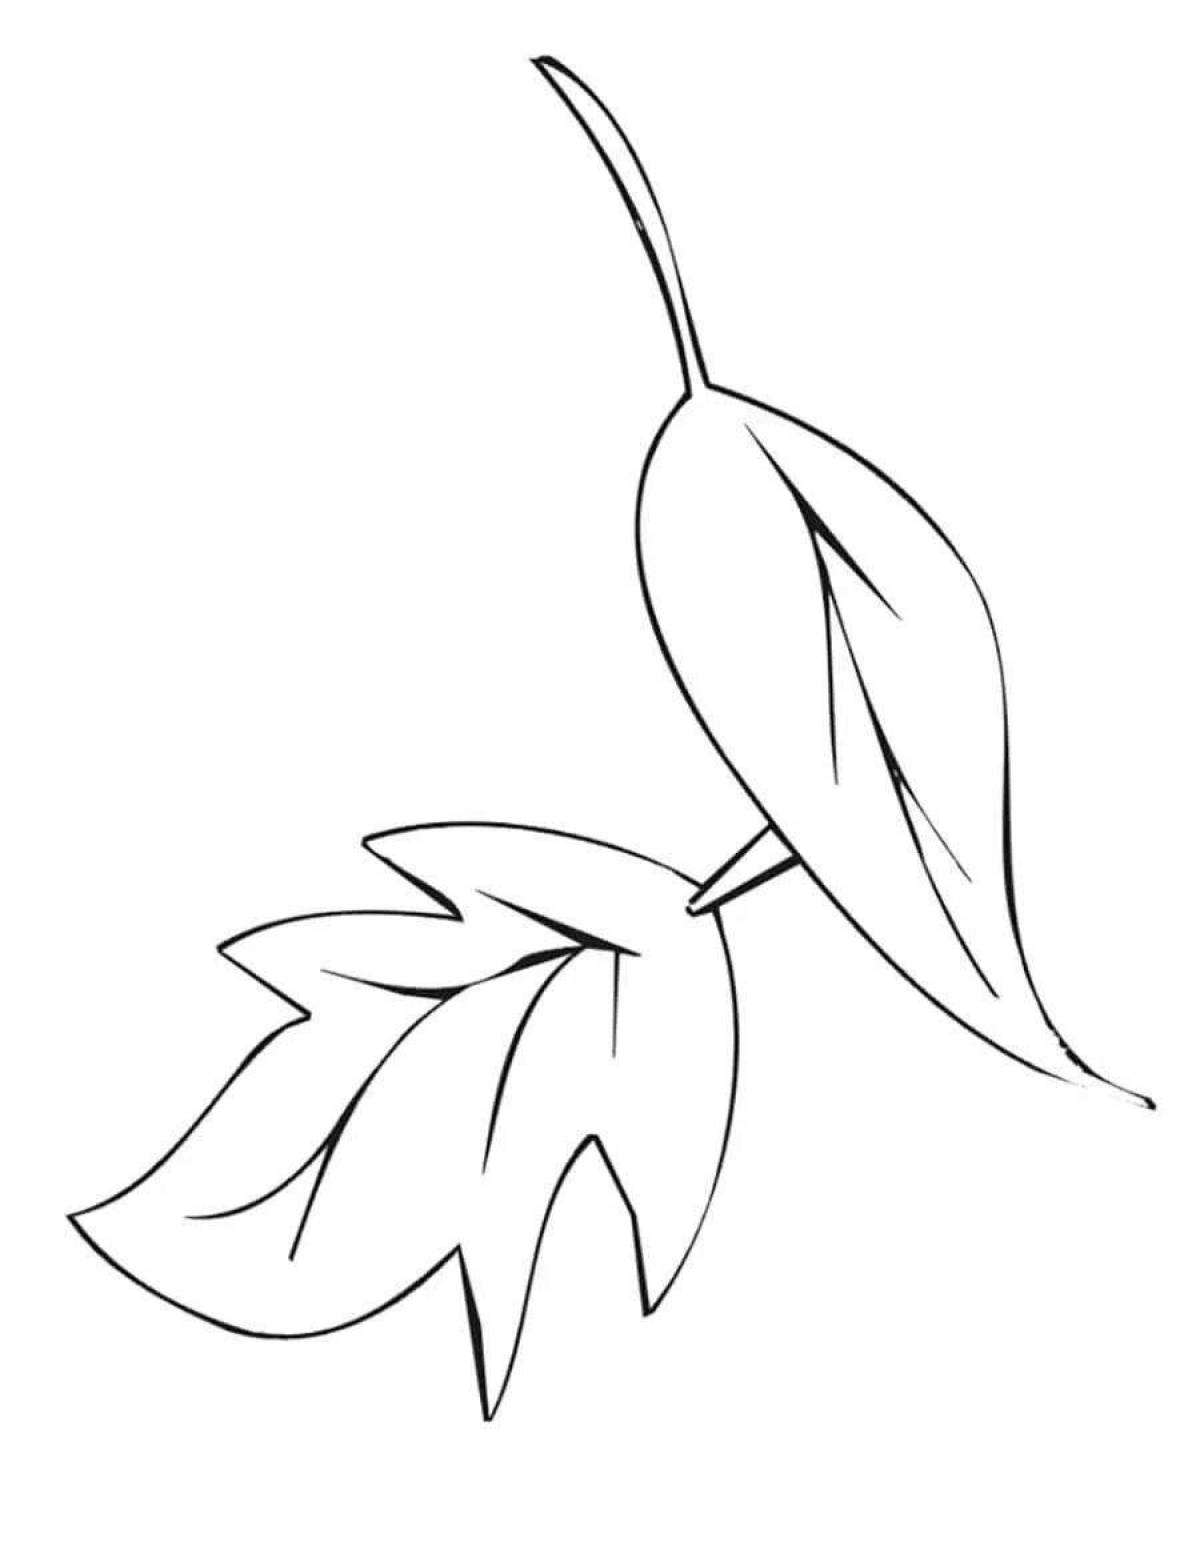 Attractive leaf coloring page for kids